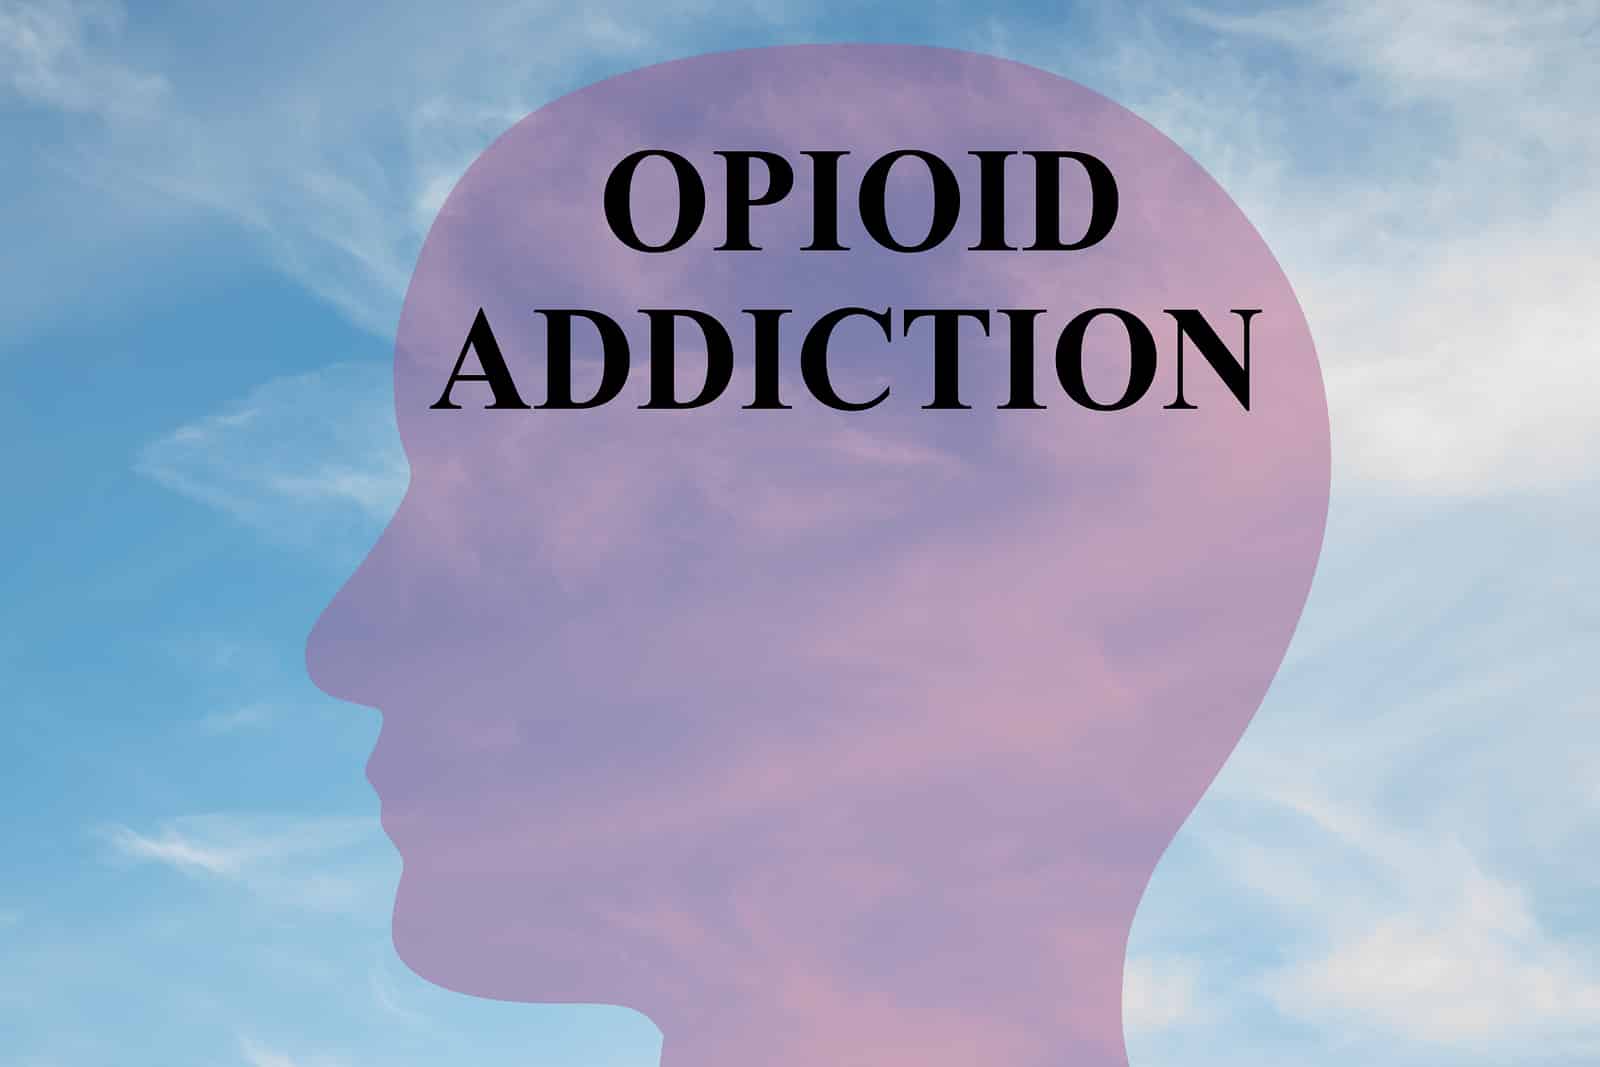 Render illustration of "OPIOID ADDICTION" script on head silhouette with cloudy sky as a background.